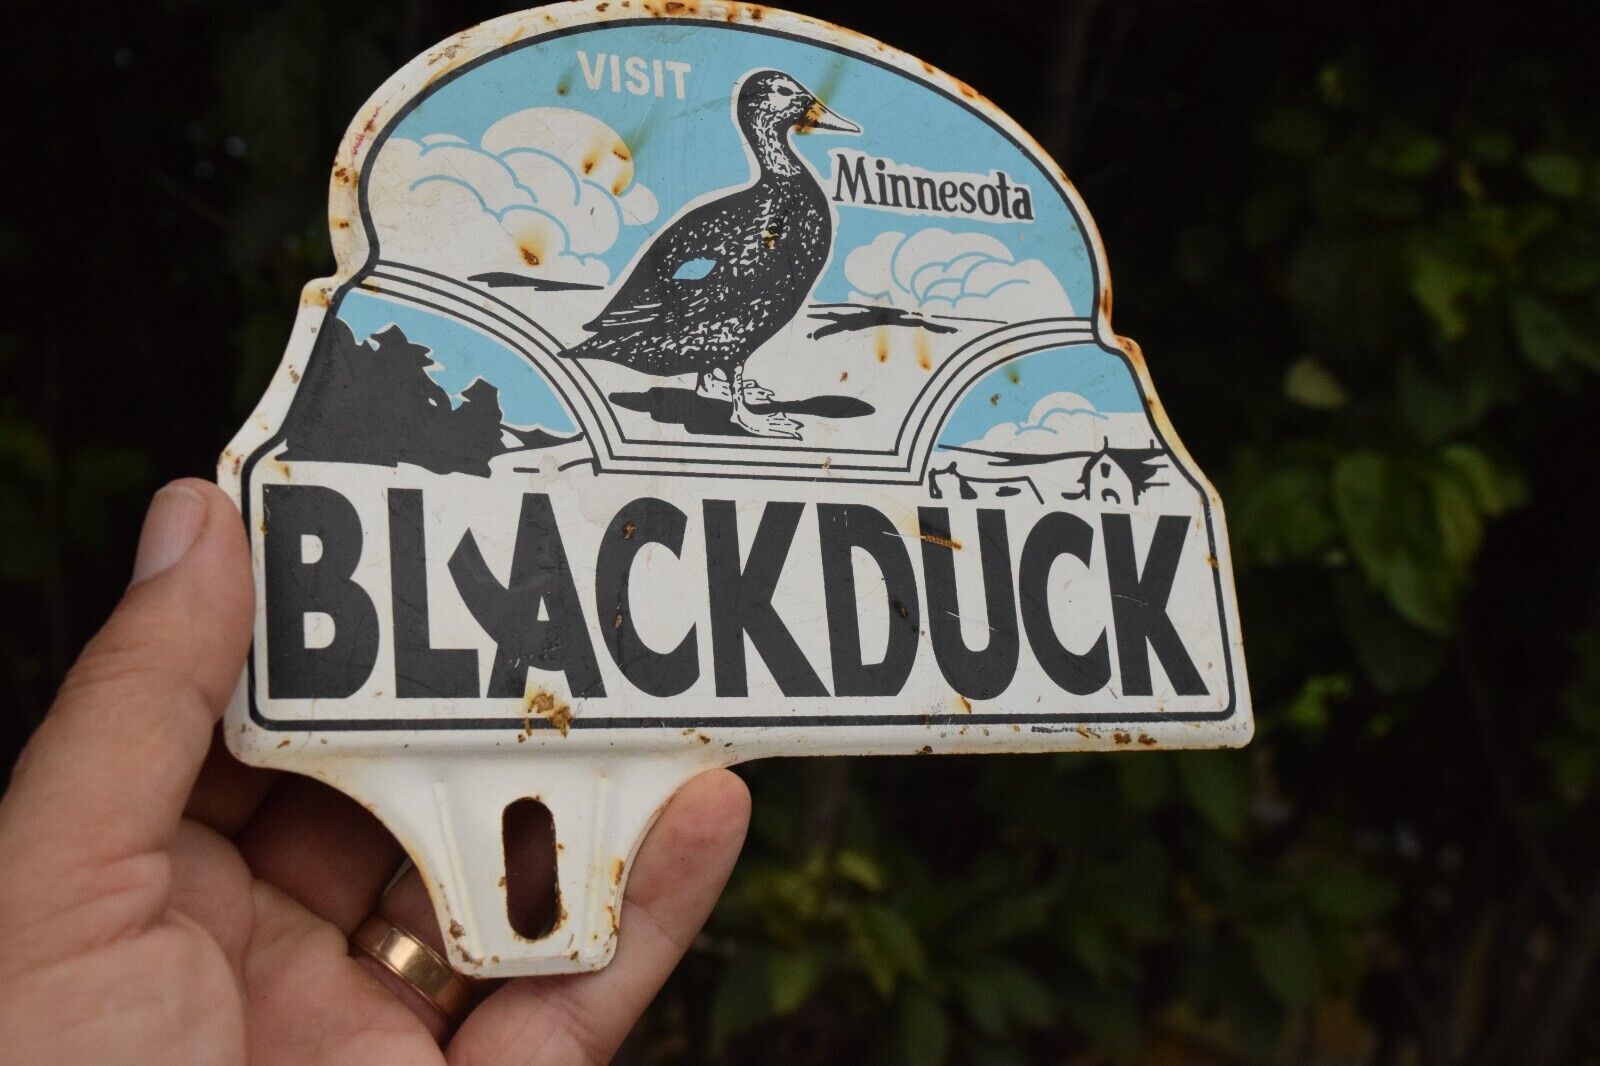 1950s MINNESOTA VISIT BLACKDUCK STAMPED PAINTED METAL TOPPER SIGN PARK GAS OIL